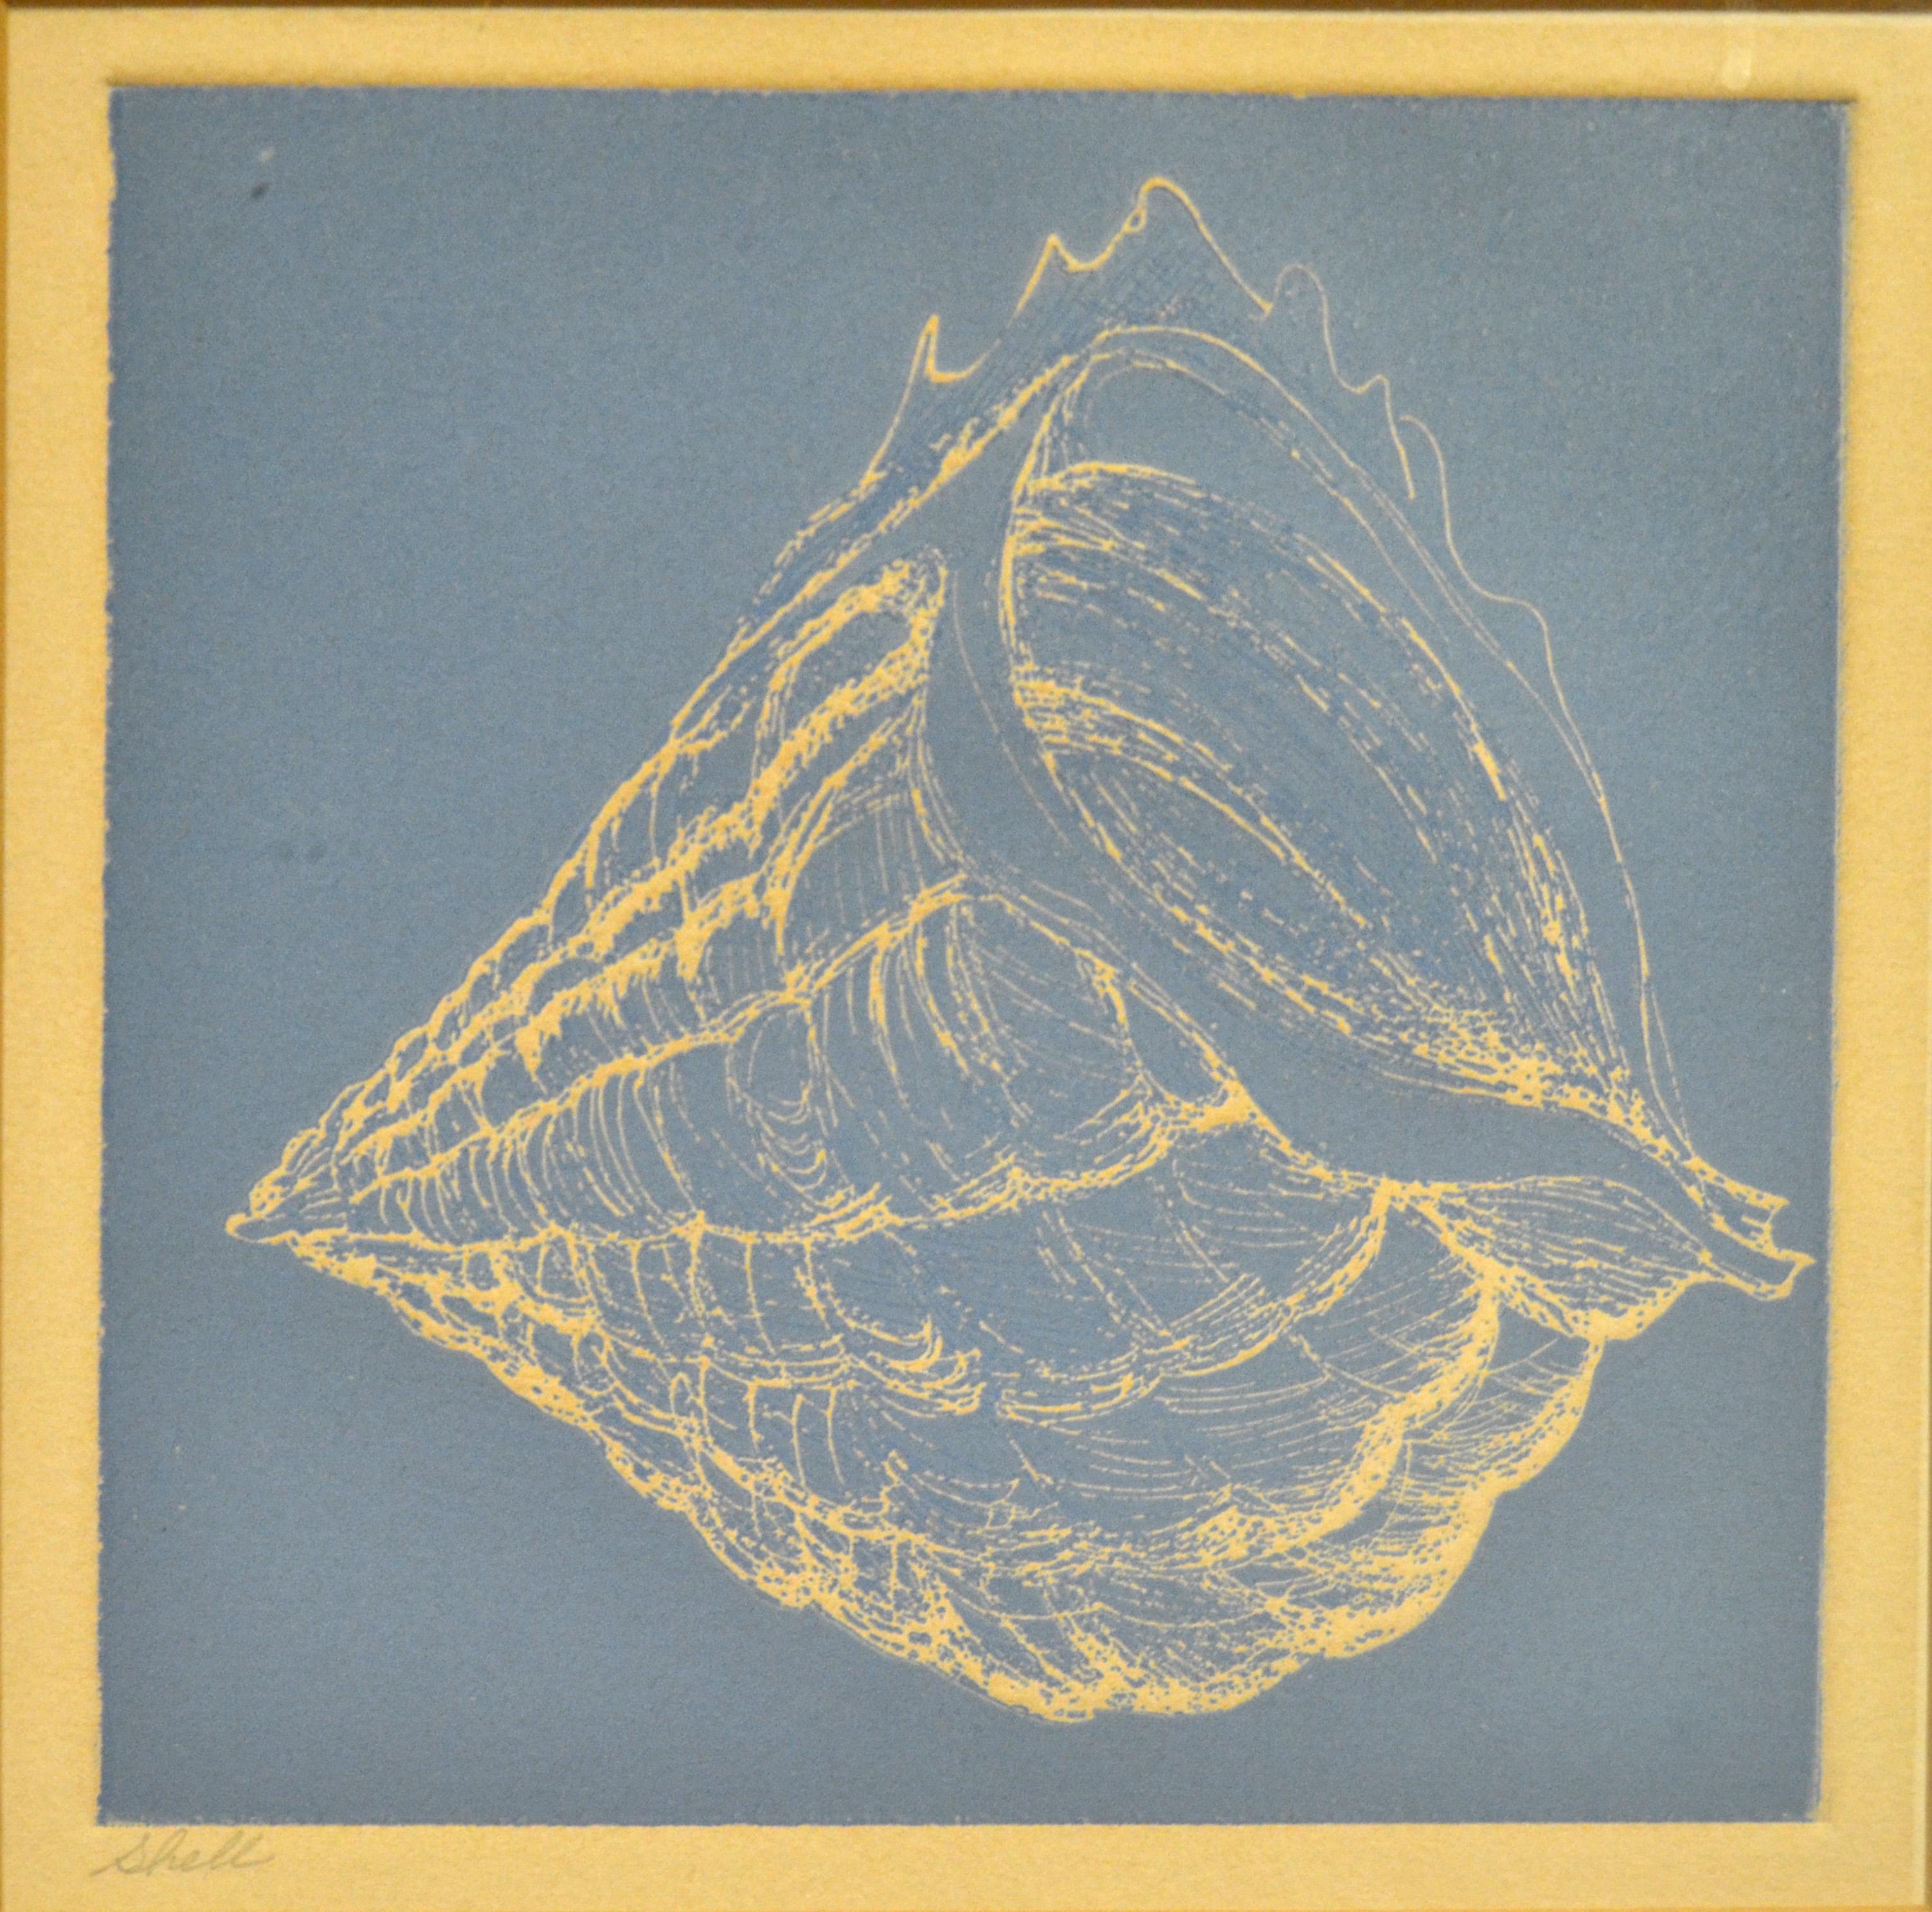 Nautical Seashell Pencil Painting in Beige on blue Paper.
Brushed Chrome Frame for secure hanging. 
Titled Shell, and Art Size is 13.5 x 9.38 inches.